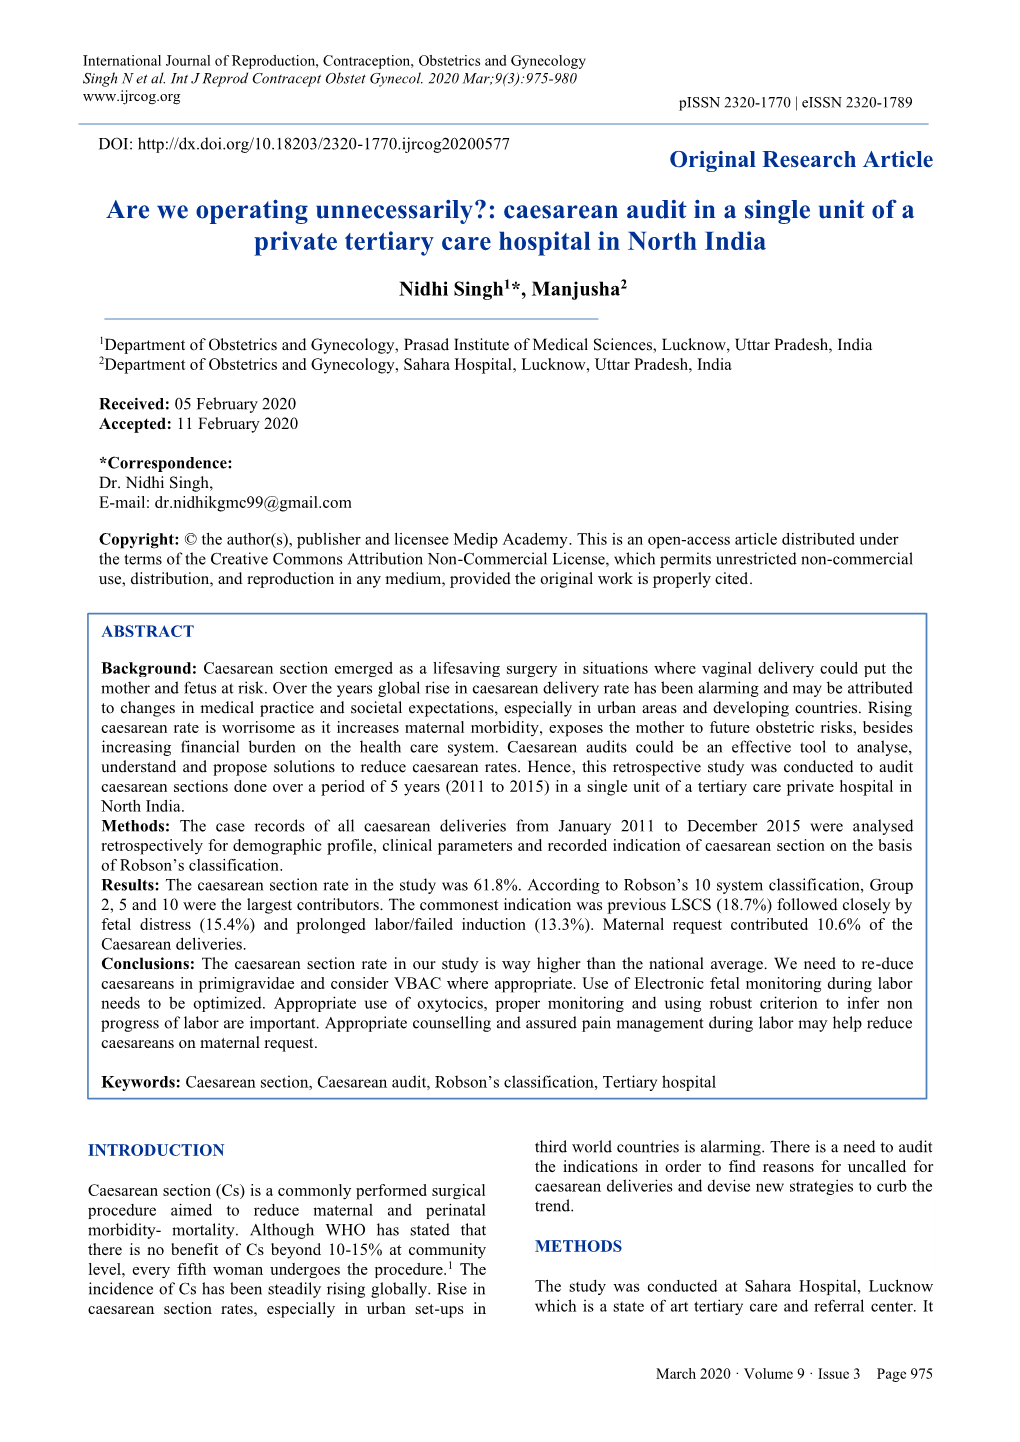 Caesarean Audit in a Single Unit of a Private Tertiary Care Hospital in North India